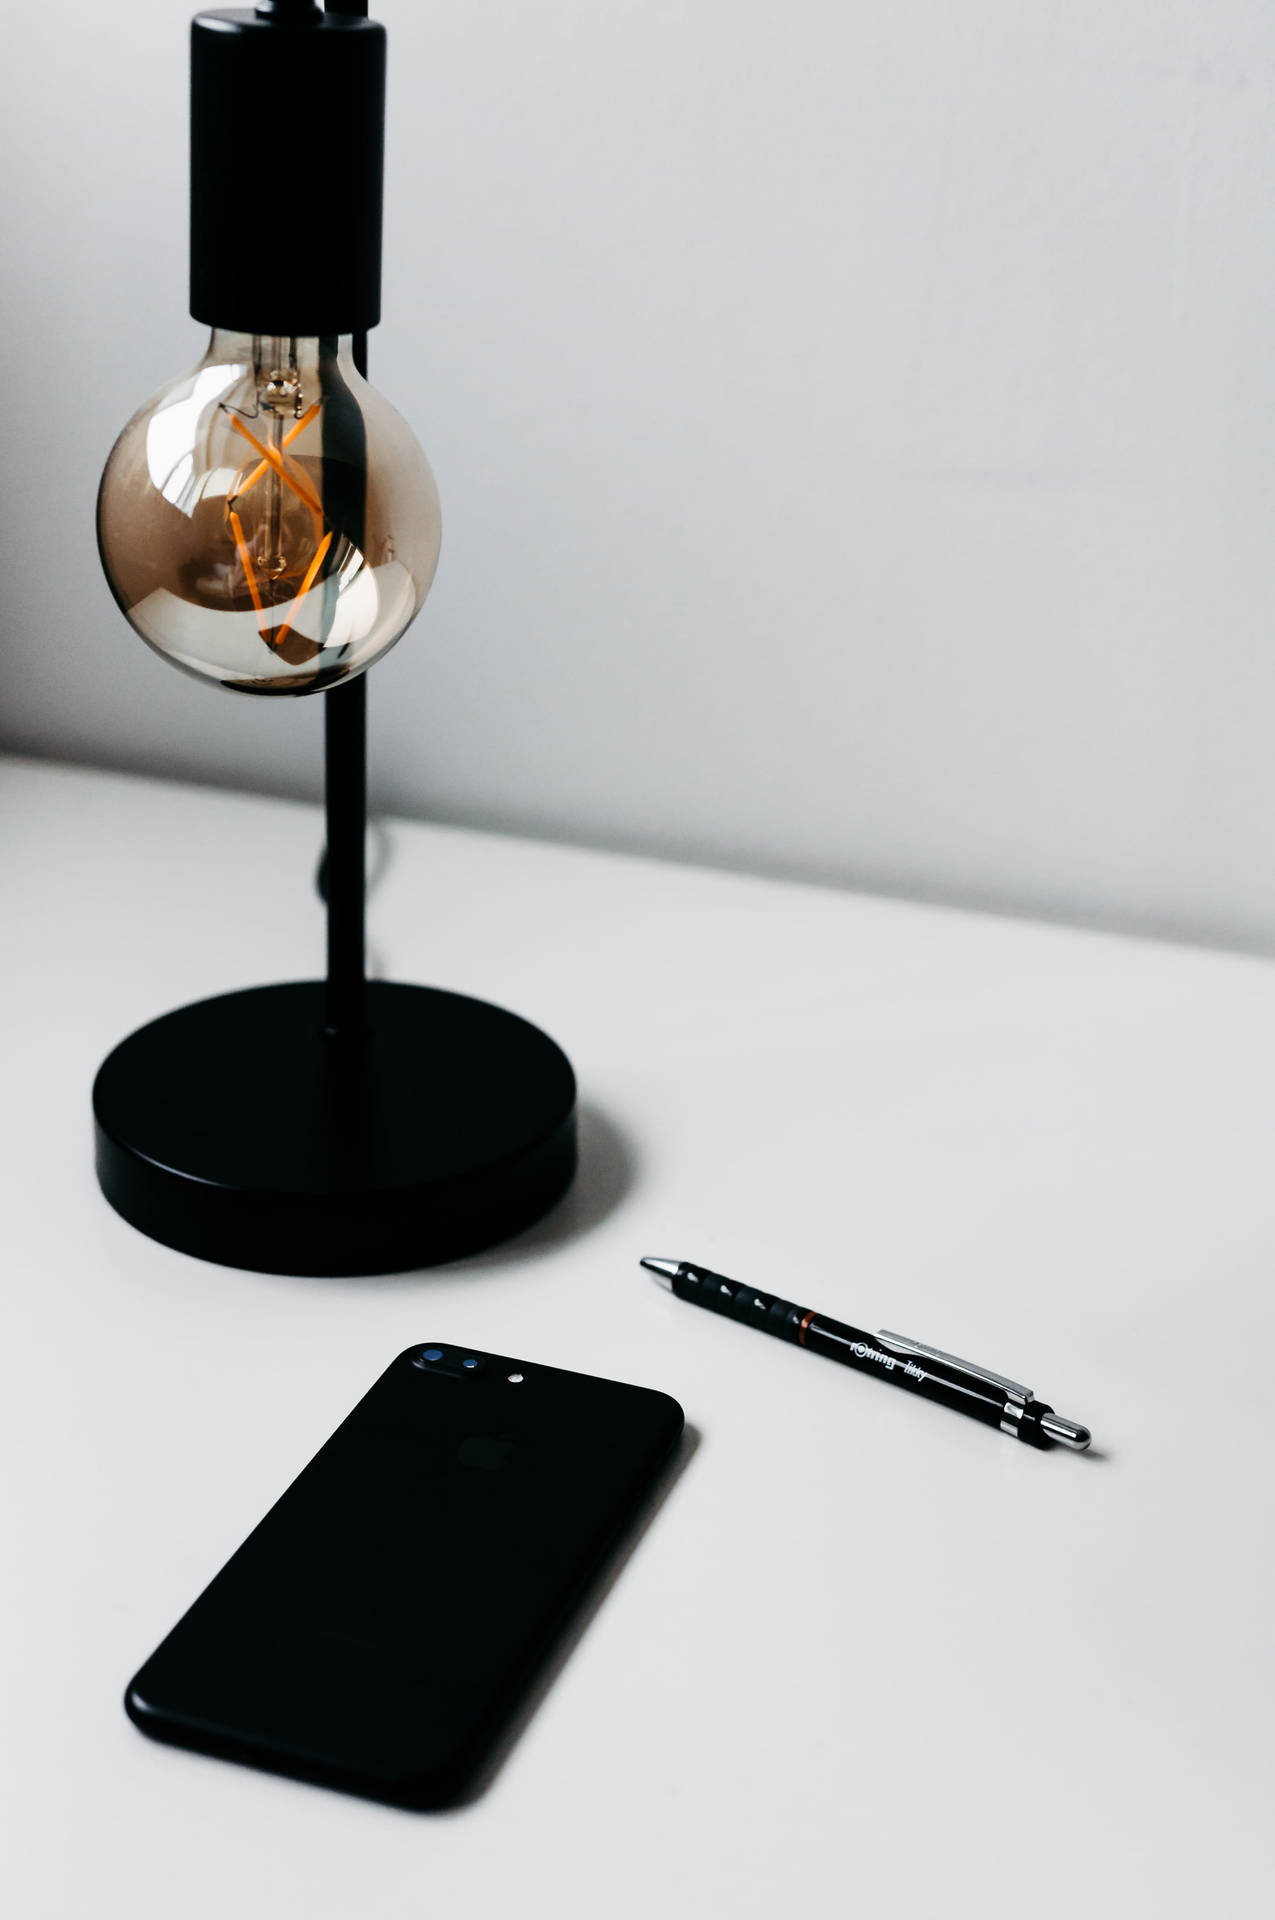 Iphone Desk With Lamp Picture